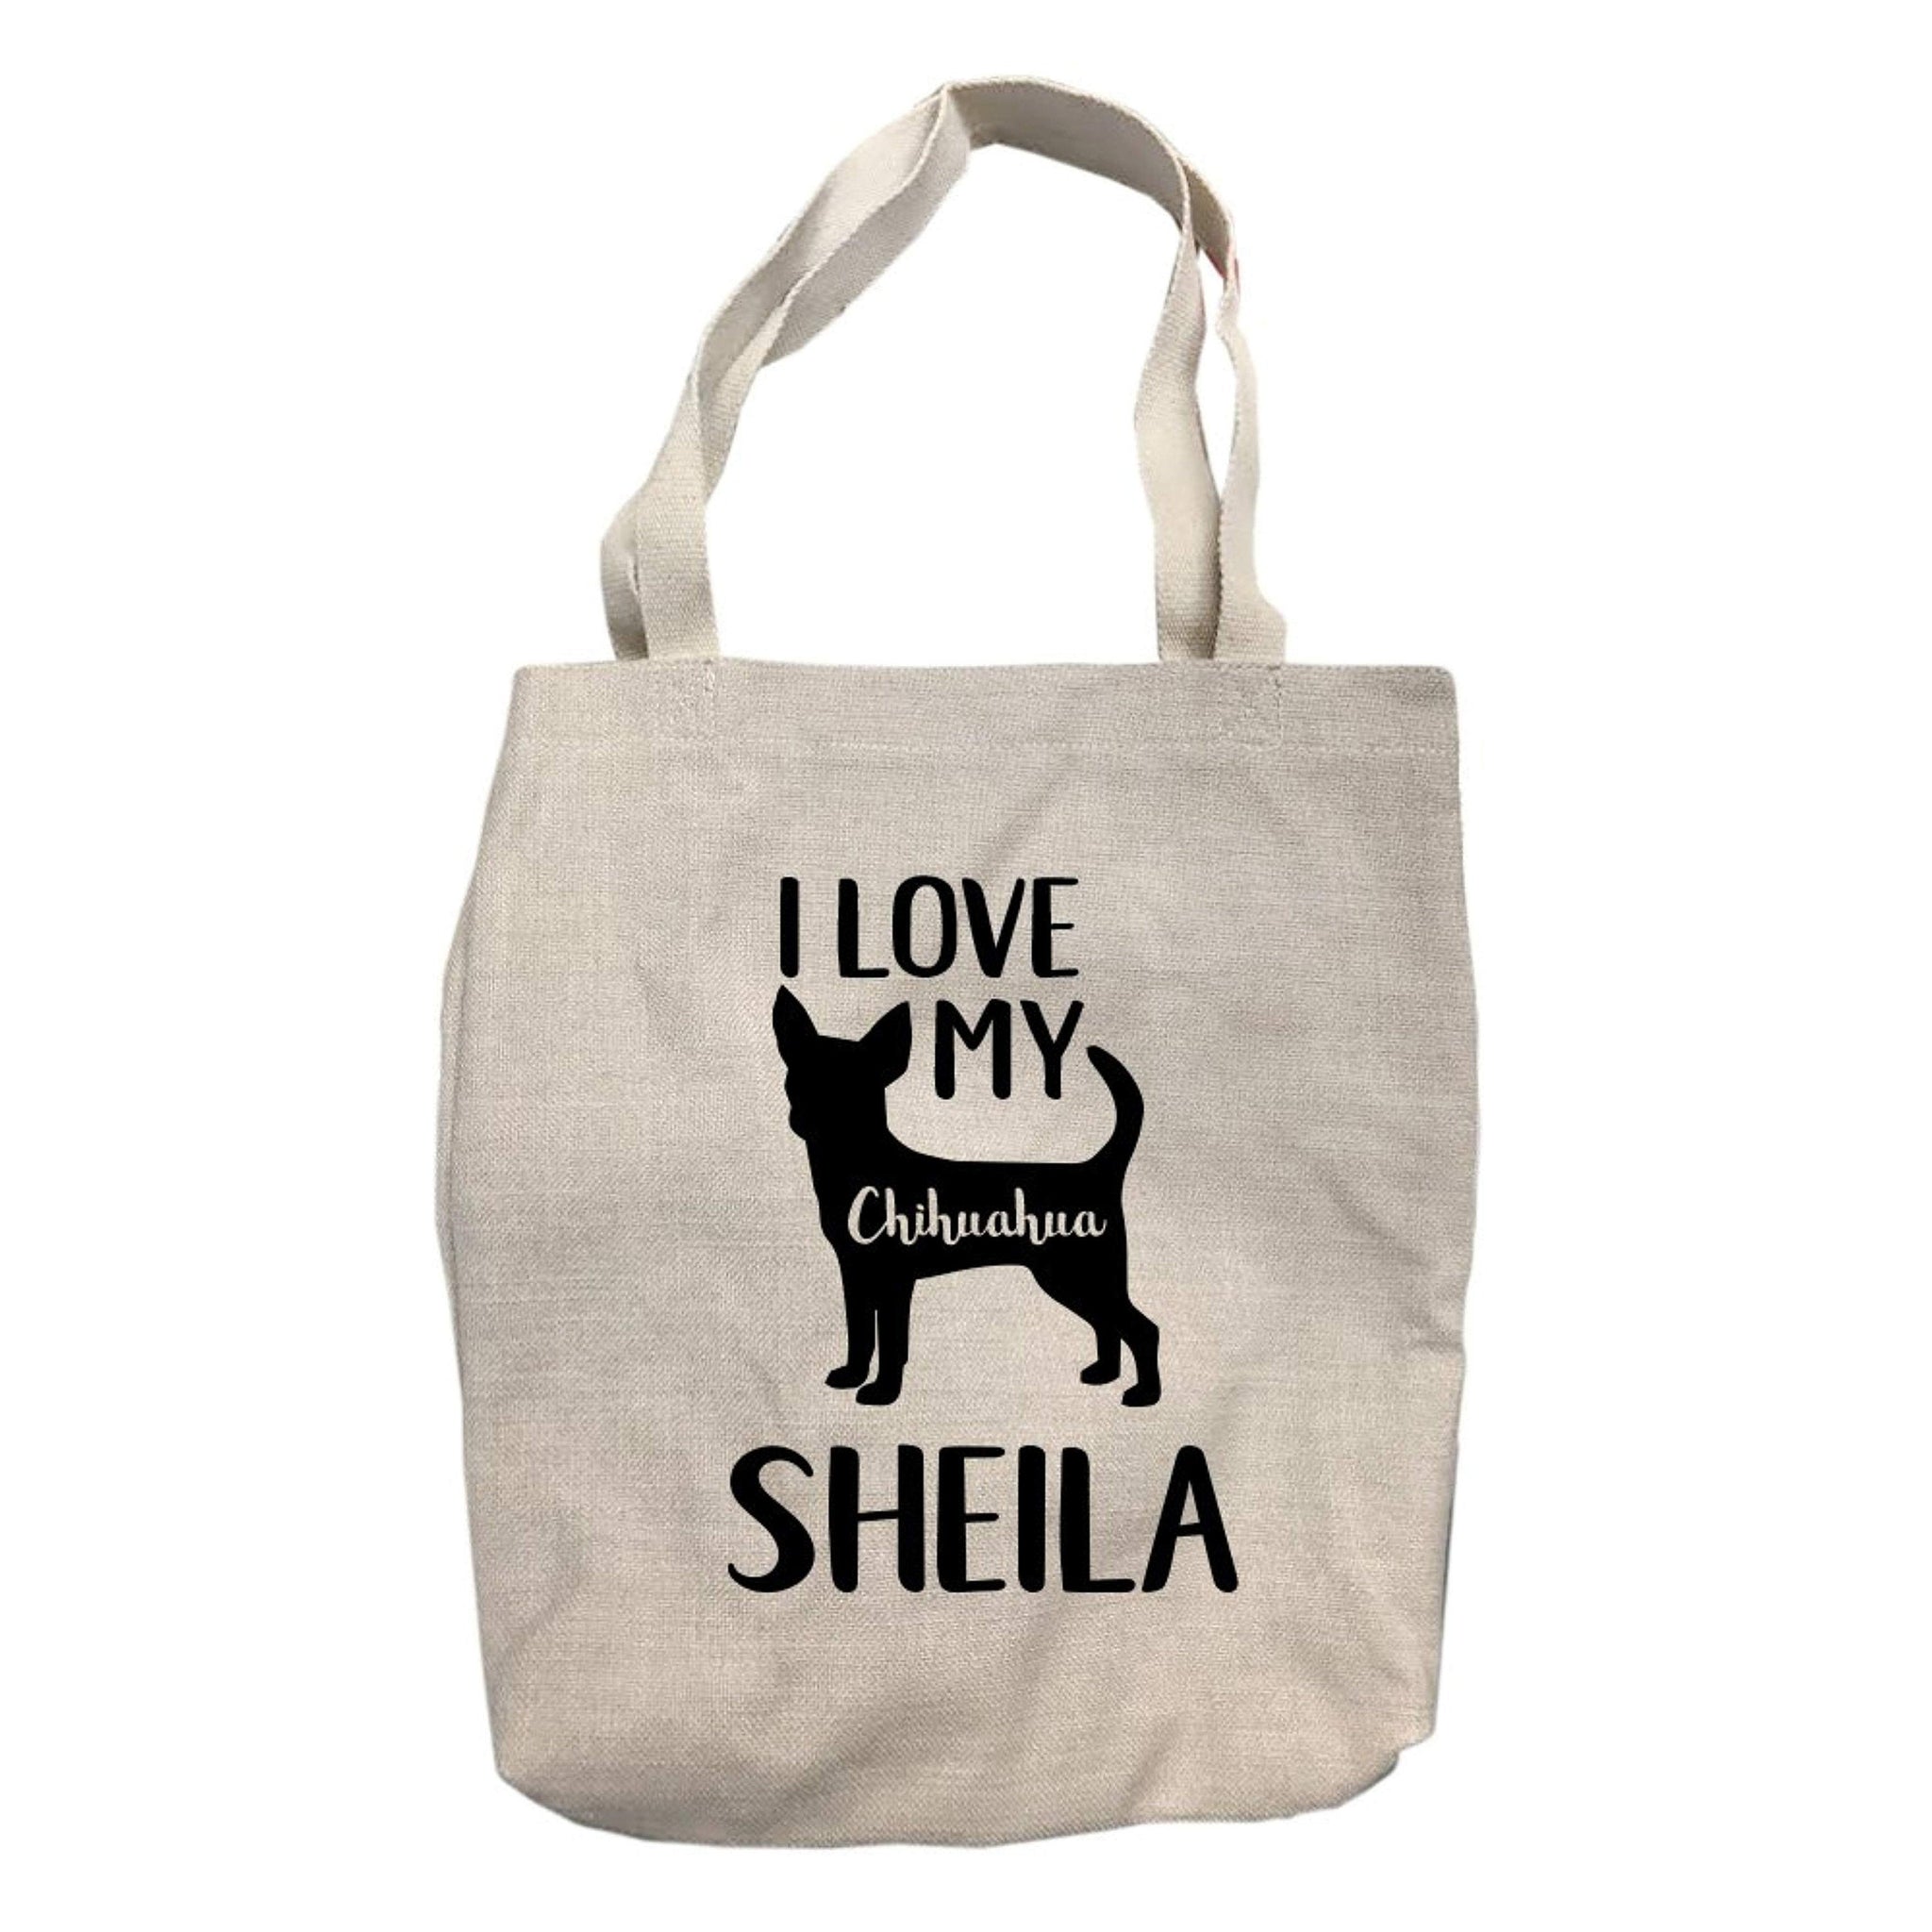 Personalized I Love My Chihuahua Tote Bag